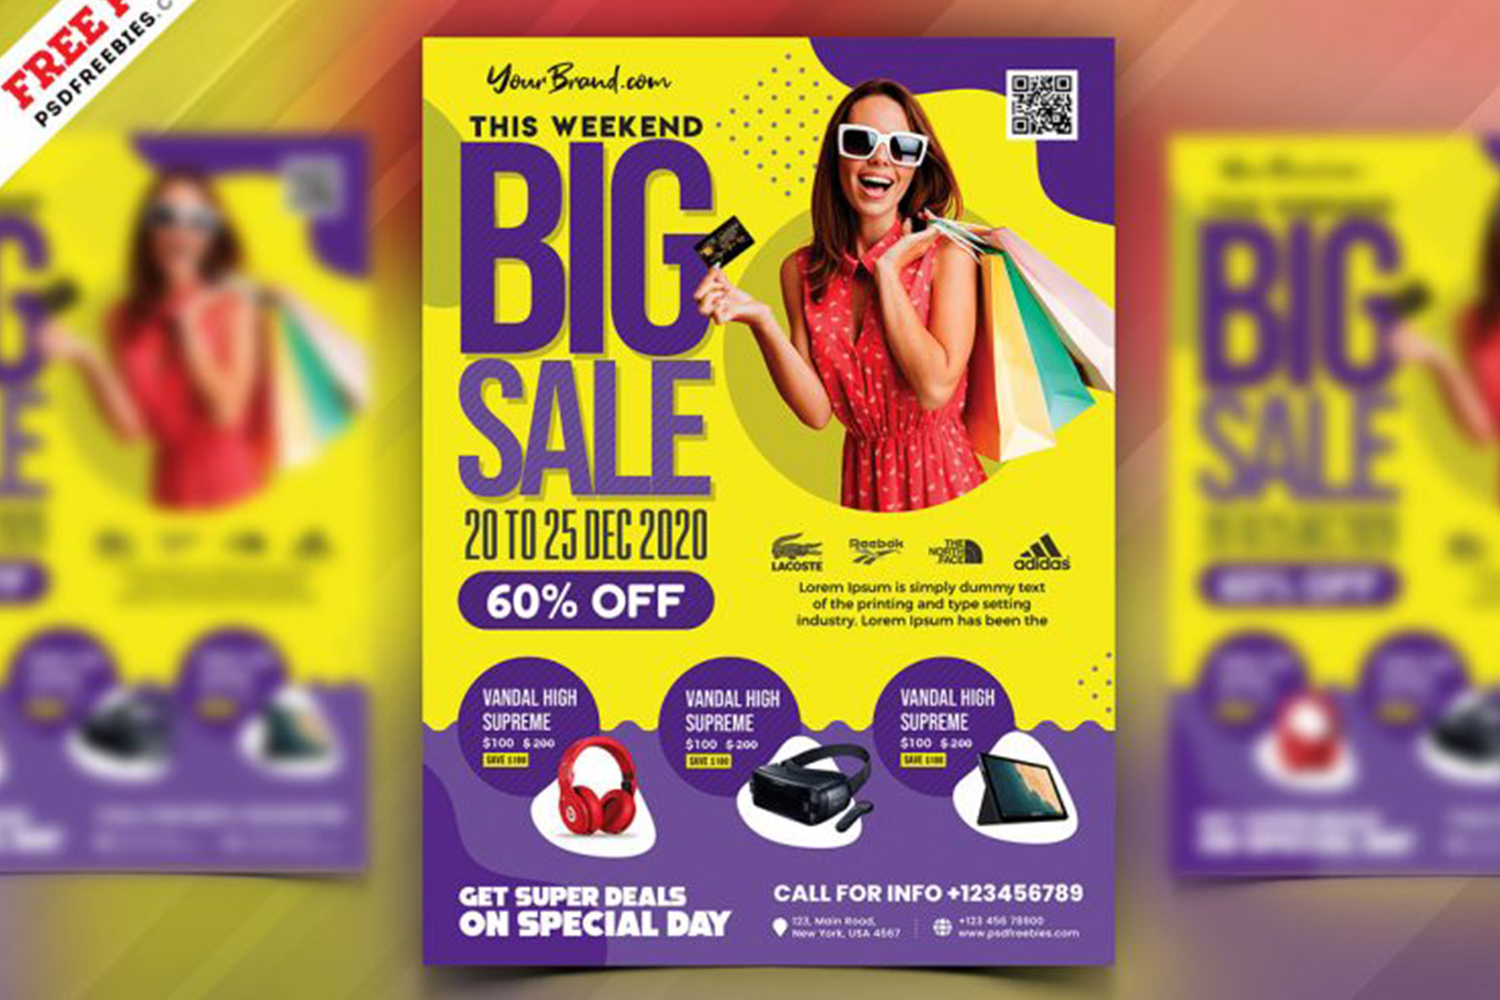 Colorful Big Sale Flyer PSD Free Download